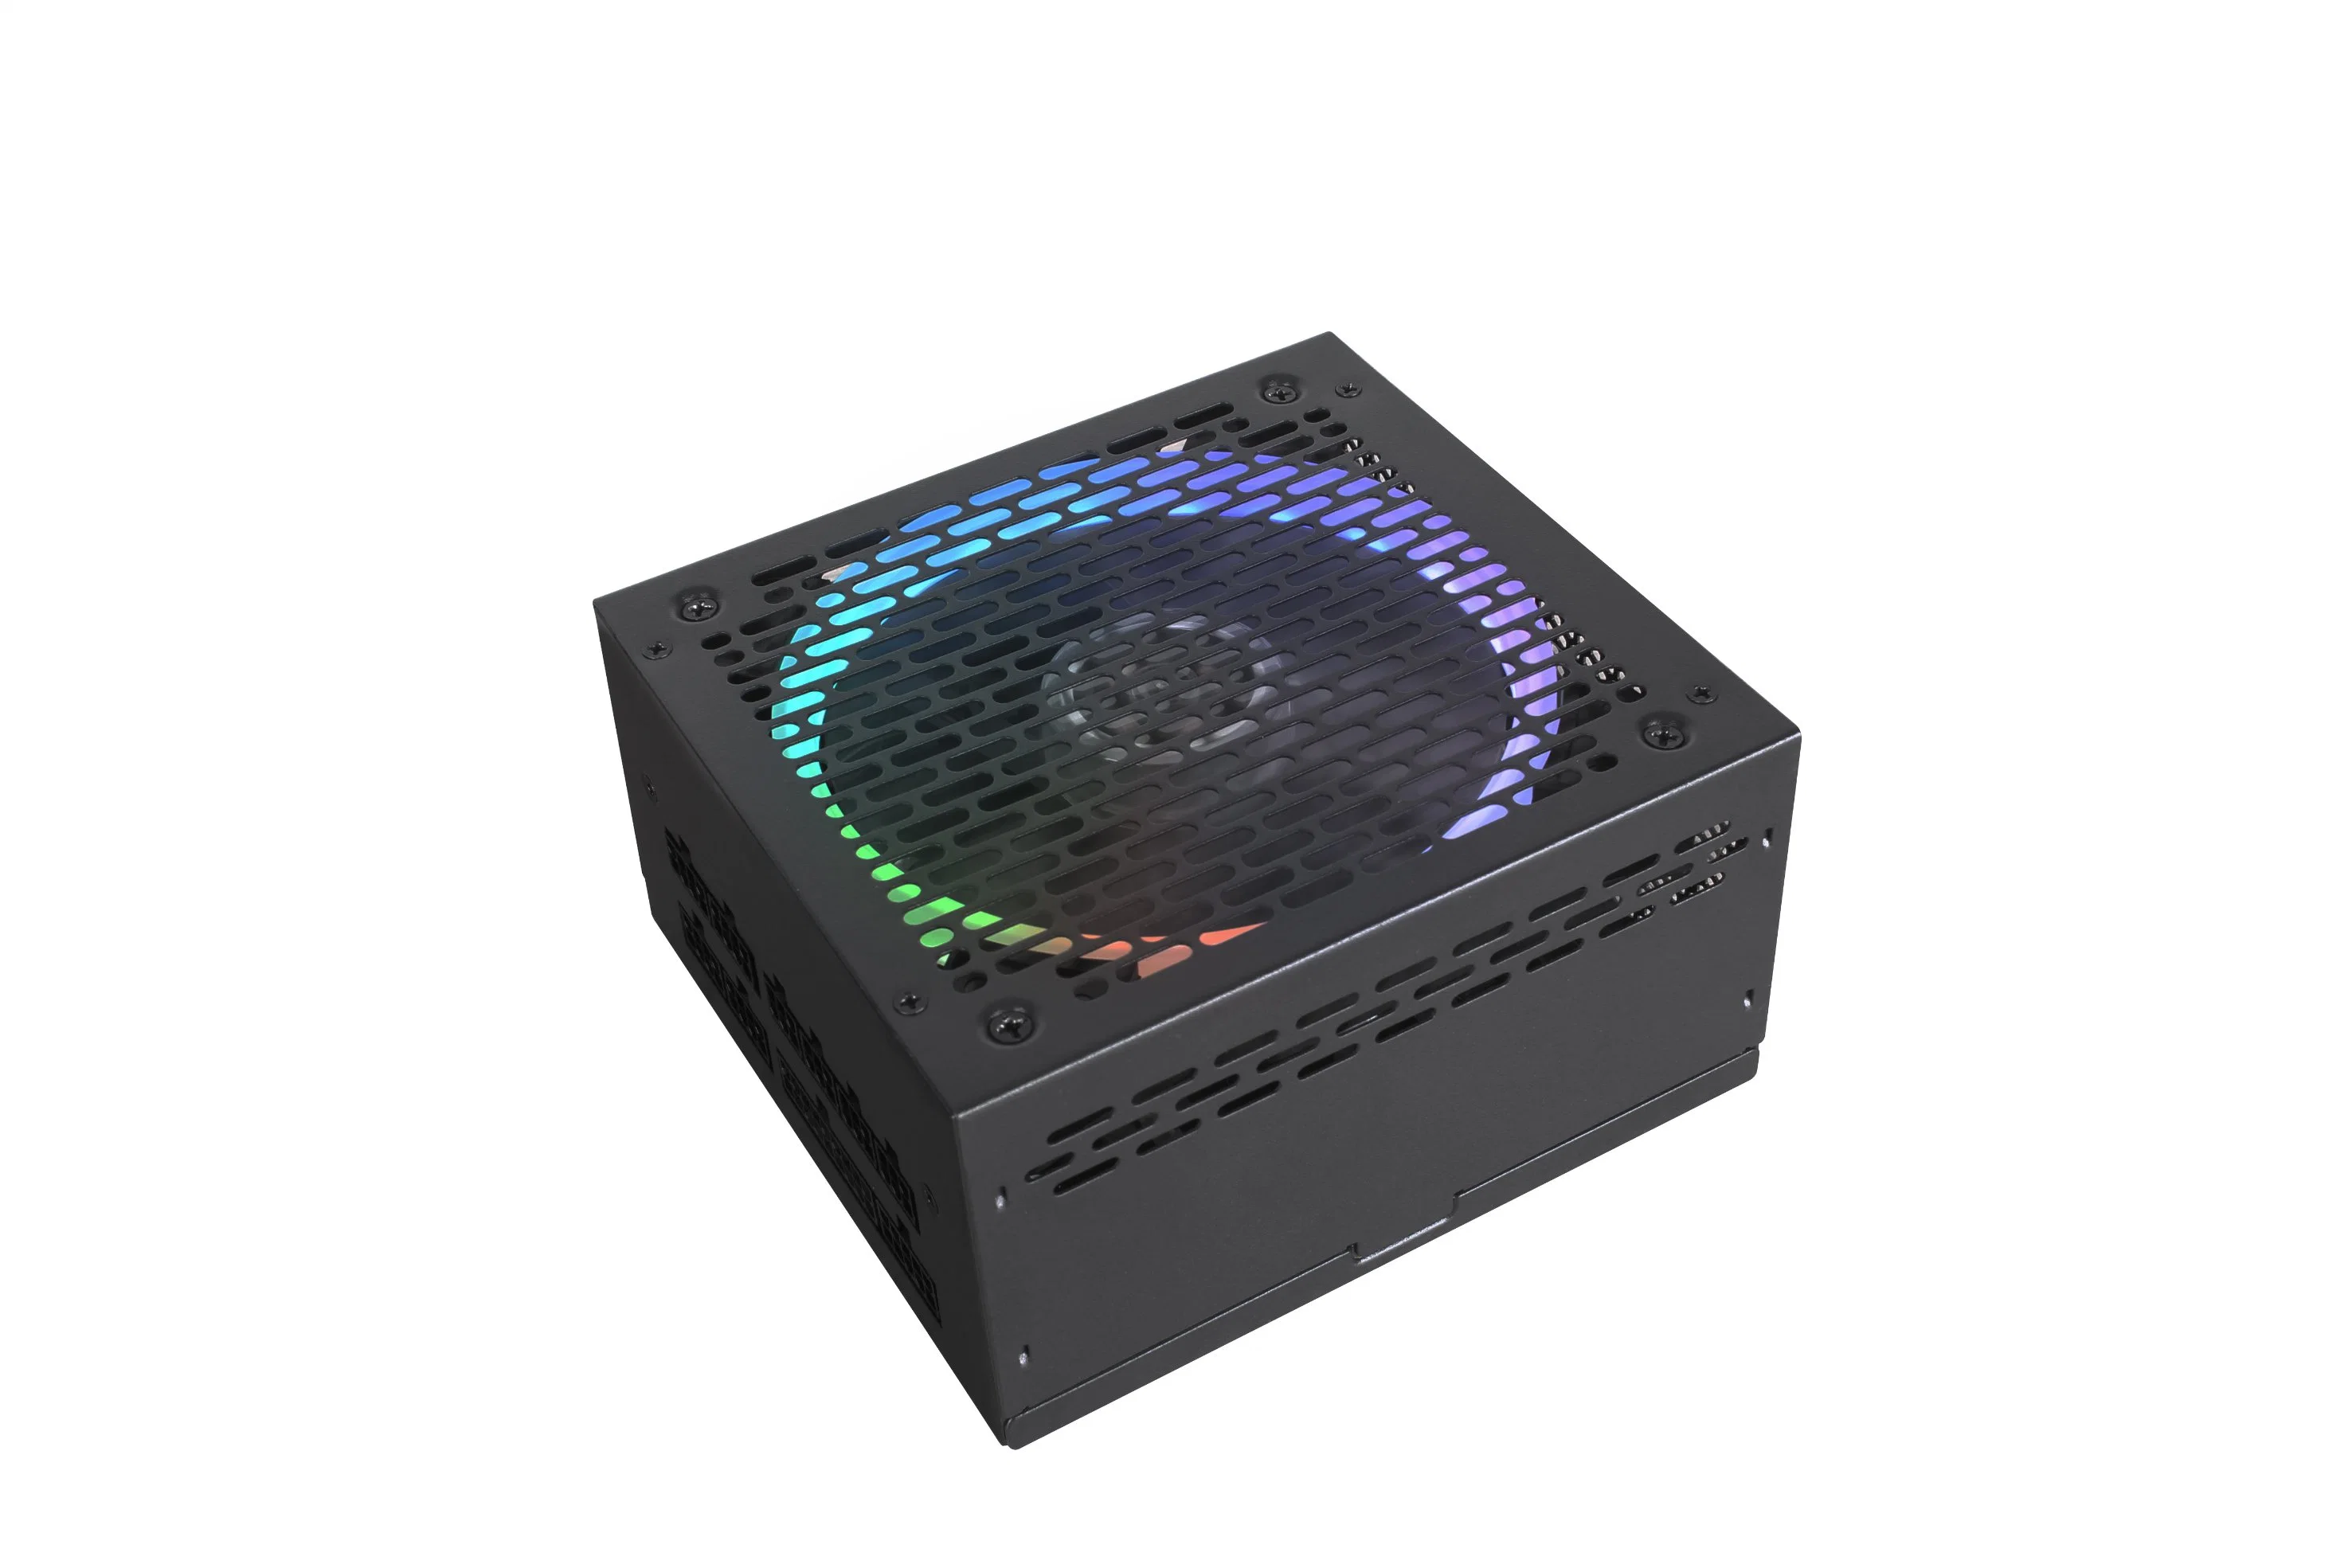 850W Gold Power Supply for Gaming Power Supply